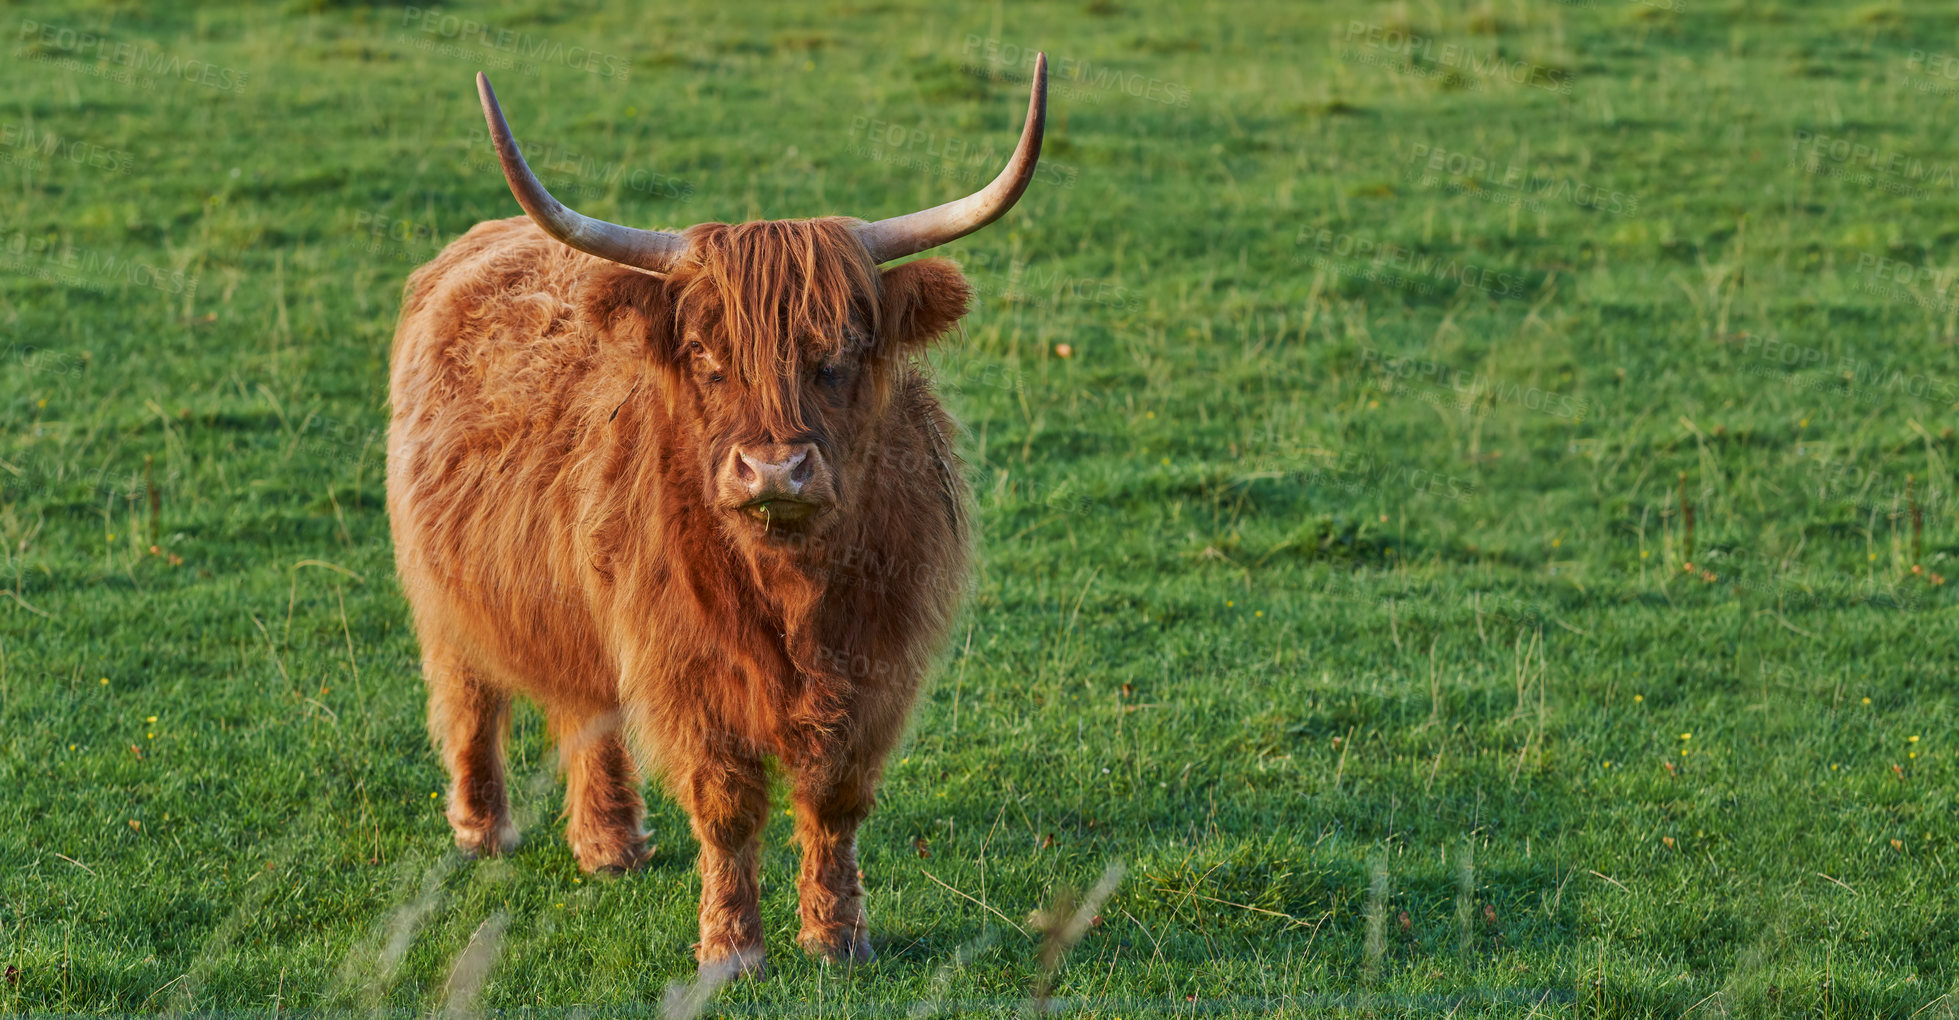 Buy stock photo Angry and dangerous bull with huge horns standing in field. Startled cow staring ahead about to charge on an open meadow. Portrait of long haired bull isolated in an open space.